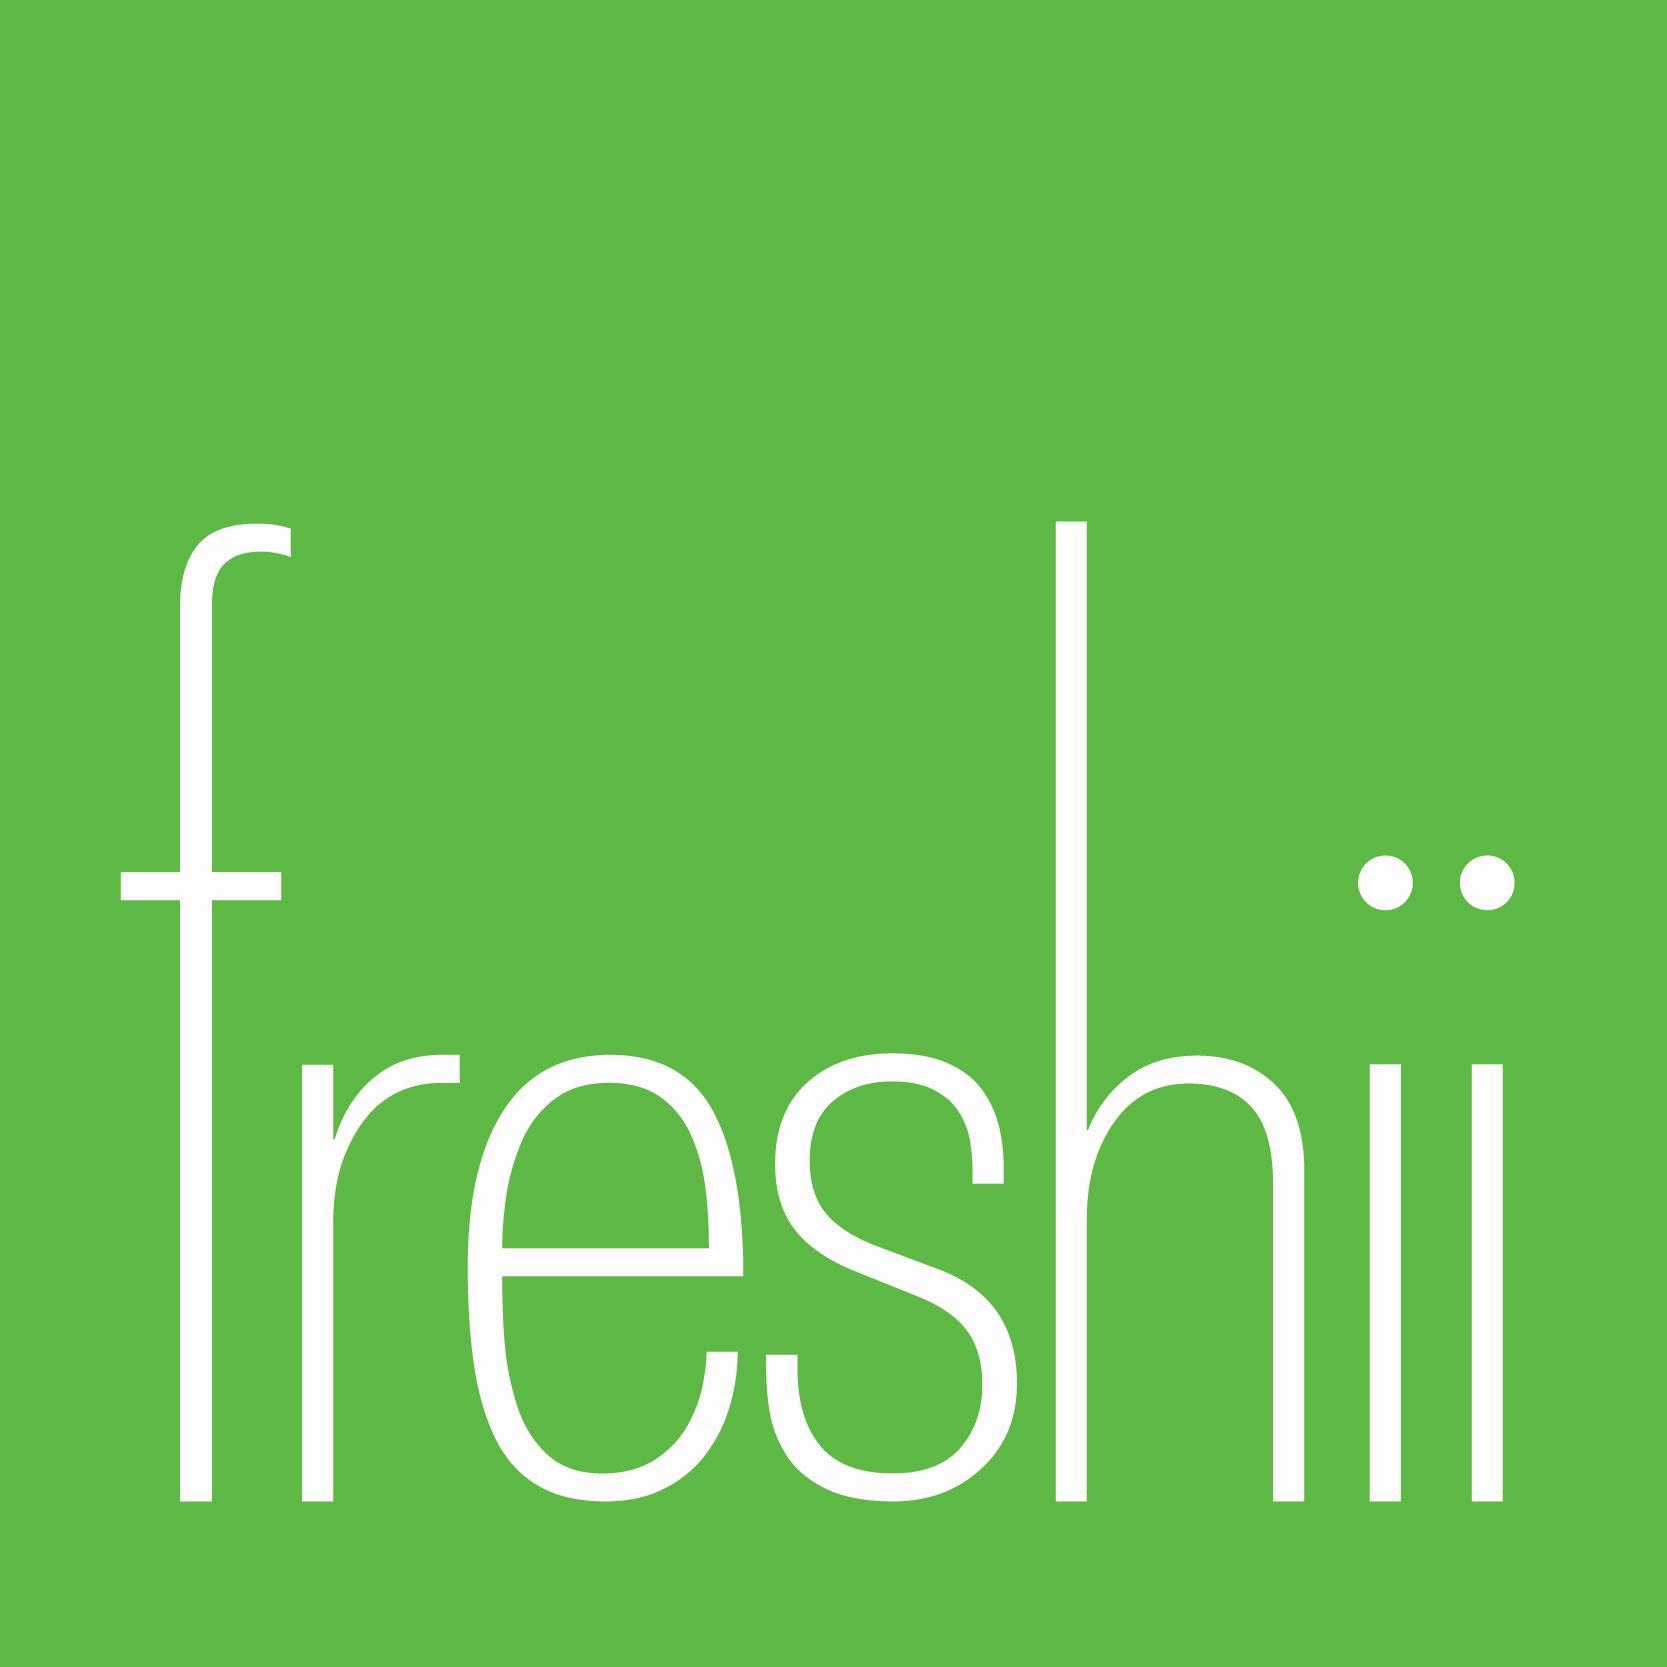 We're Freshii Burnside, proudly helping our friends in Burnside and surrounding areas eat and energize. Eat in or pick up from the only Freshii drive thru!